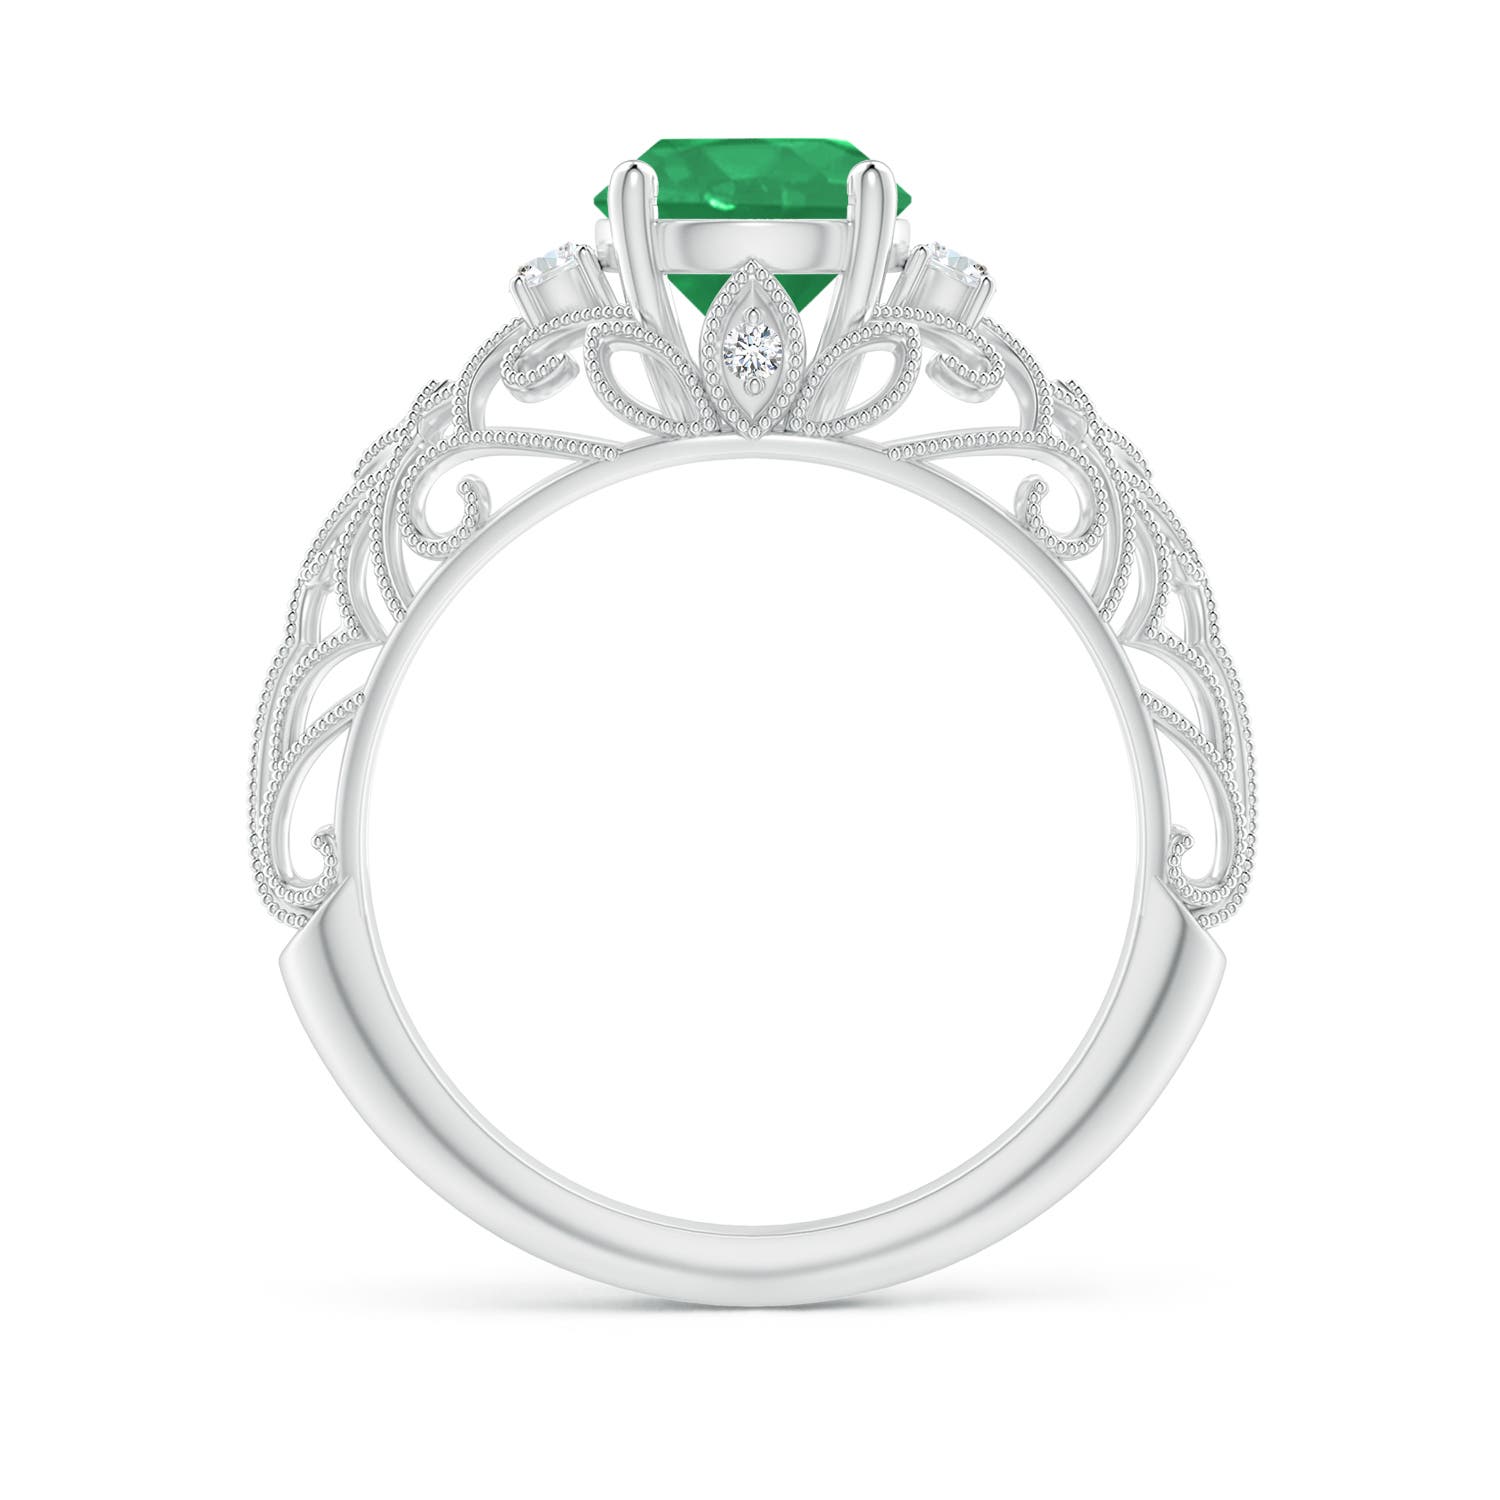 A - Emerald / 1.3 CT / 14 KT White Gold